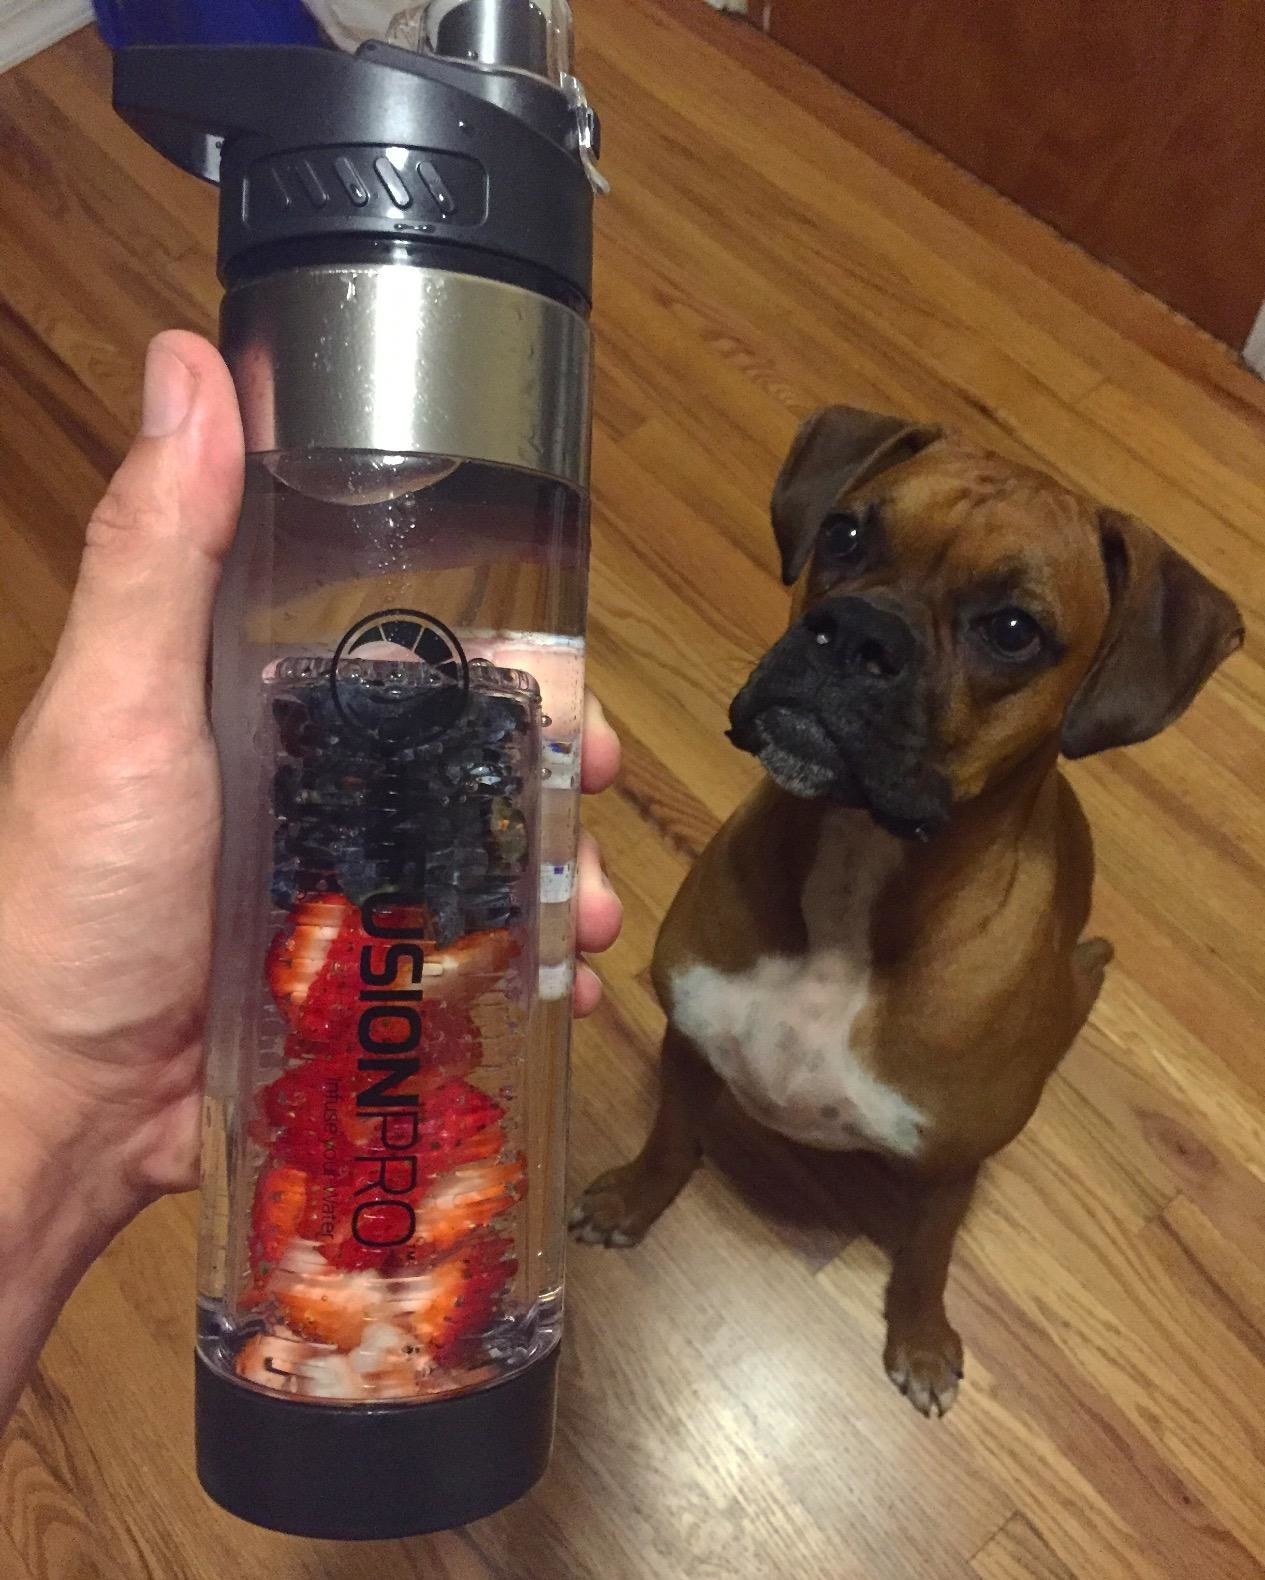 The water bottle with strawberries and blackberries in it